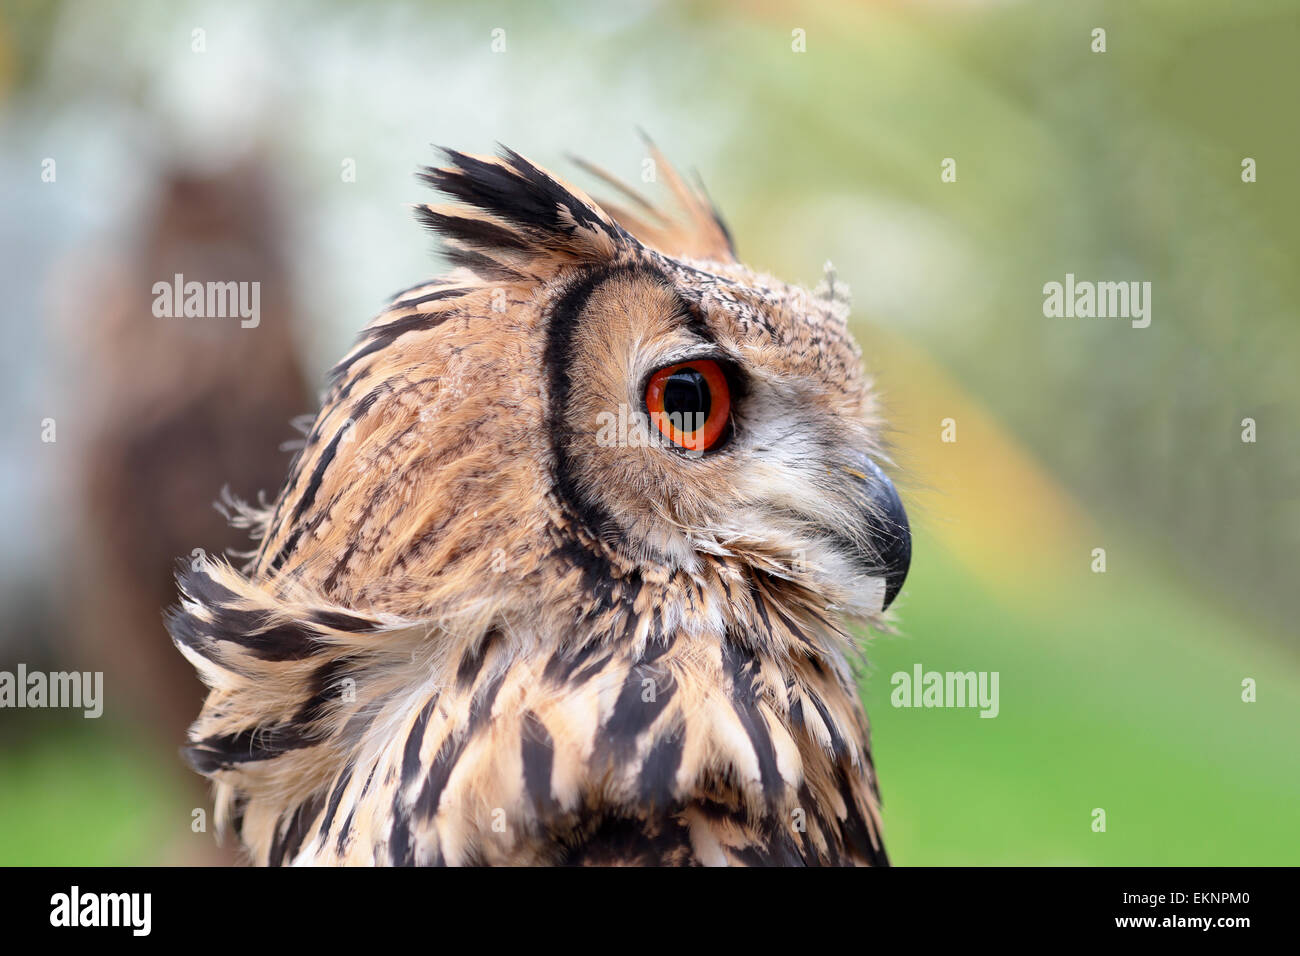 Portrait of an indian eagle-owl, Bubo bengalensis, looking behind Stock Photo